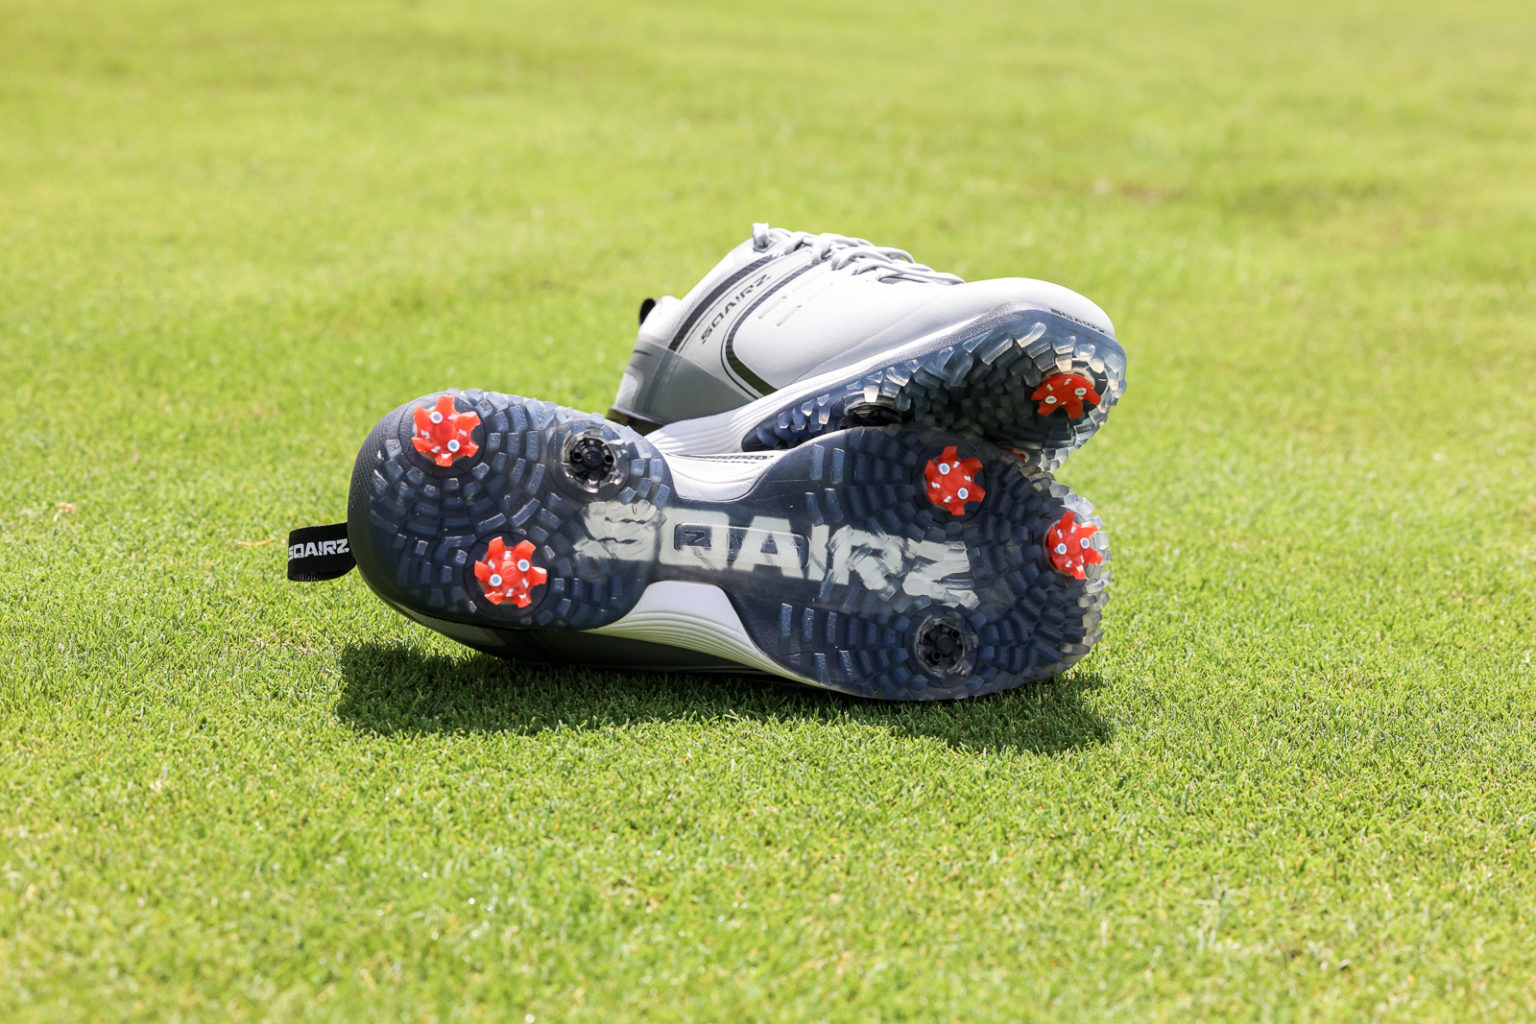 Sqairz Golf Shoes - Stylish on the Fairway